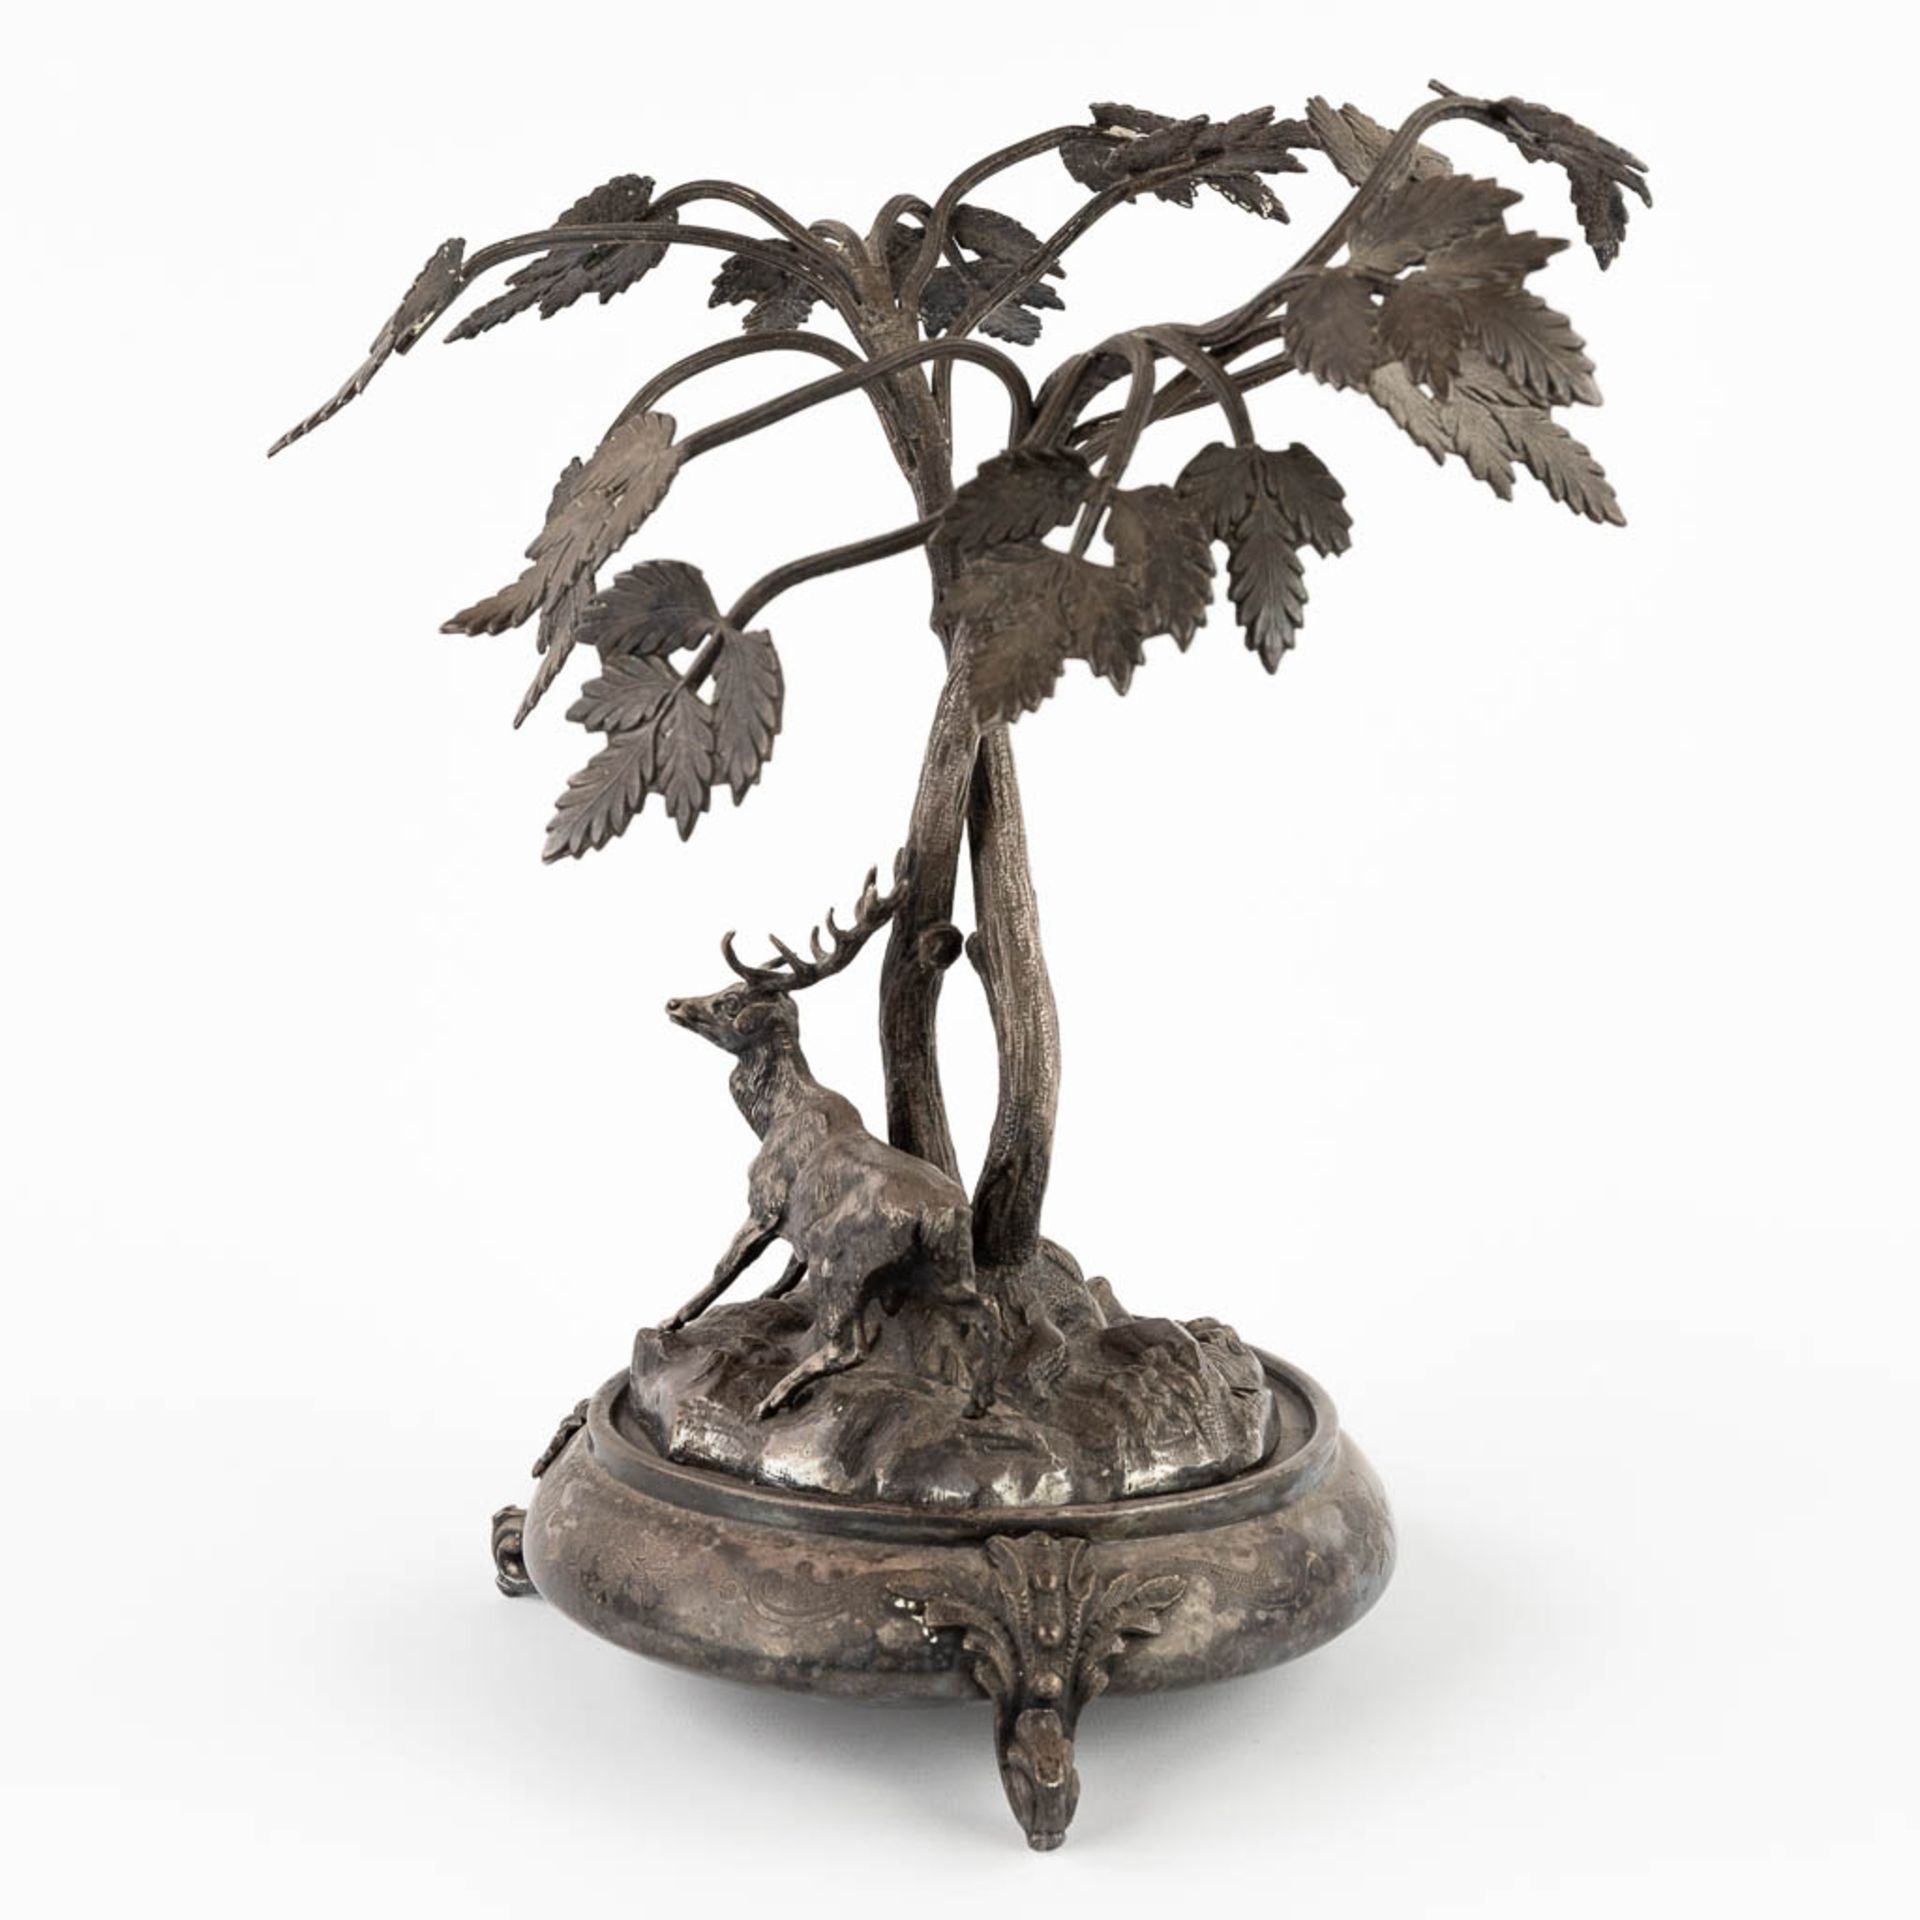 A figurine of a deer, walking under tall trees. Silver-plated bronze. Circa 1900. (D:24 x W:30 x H:3 - Image 7 of 13